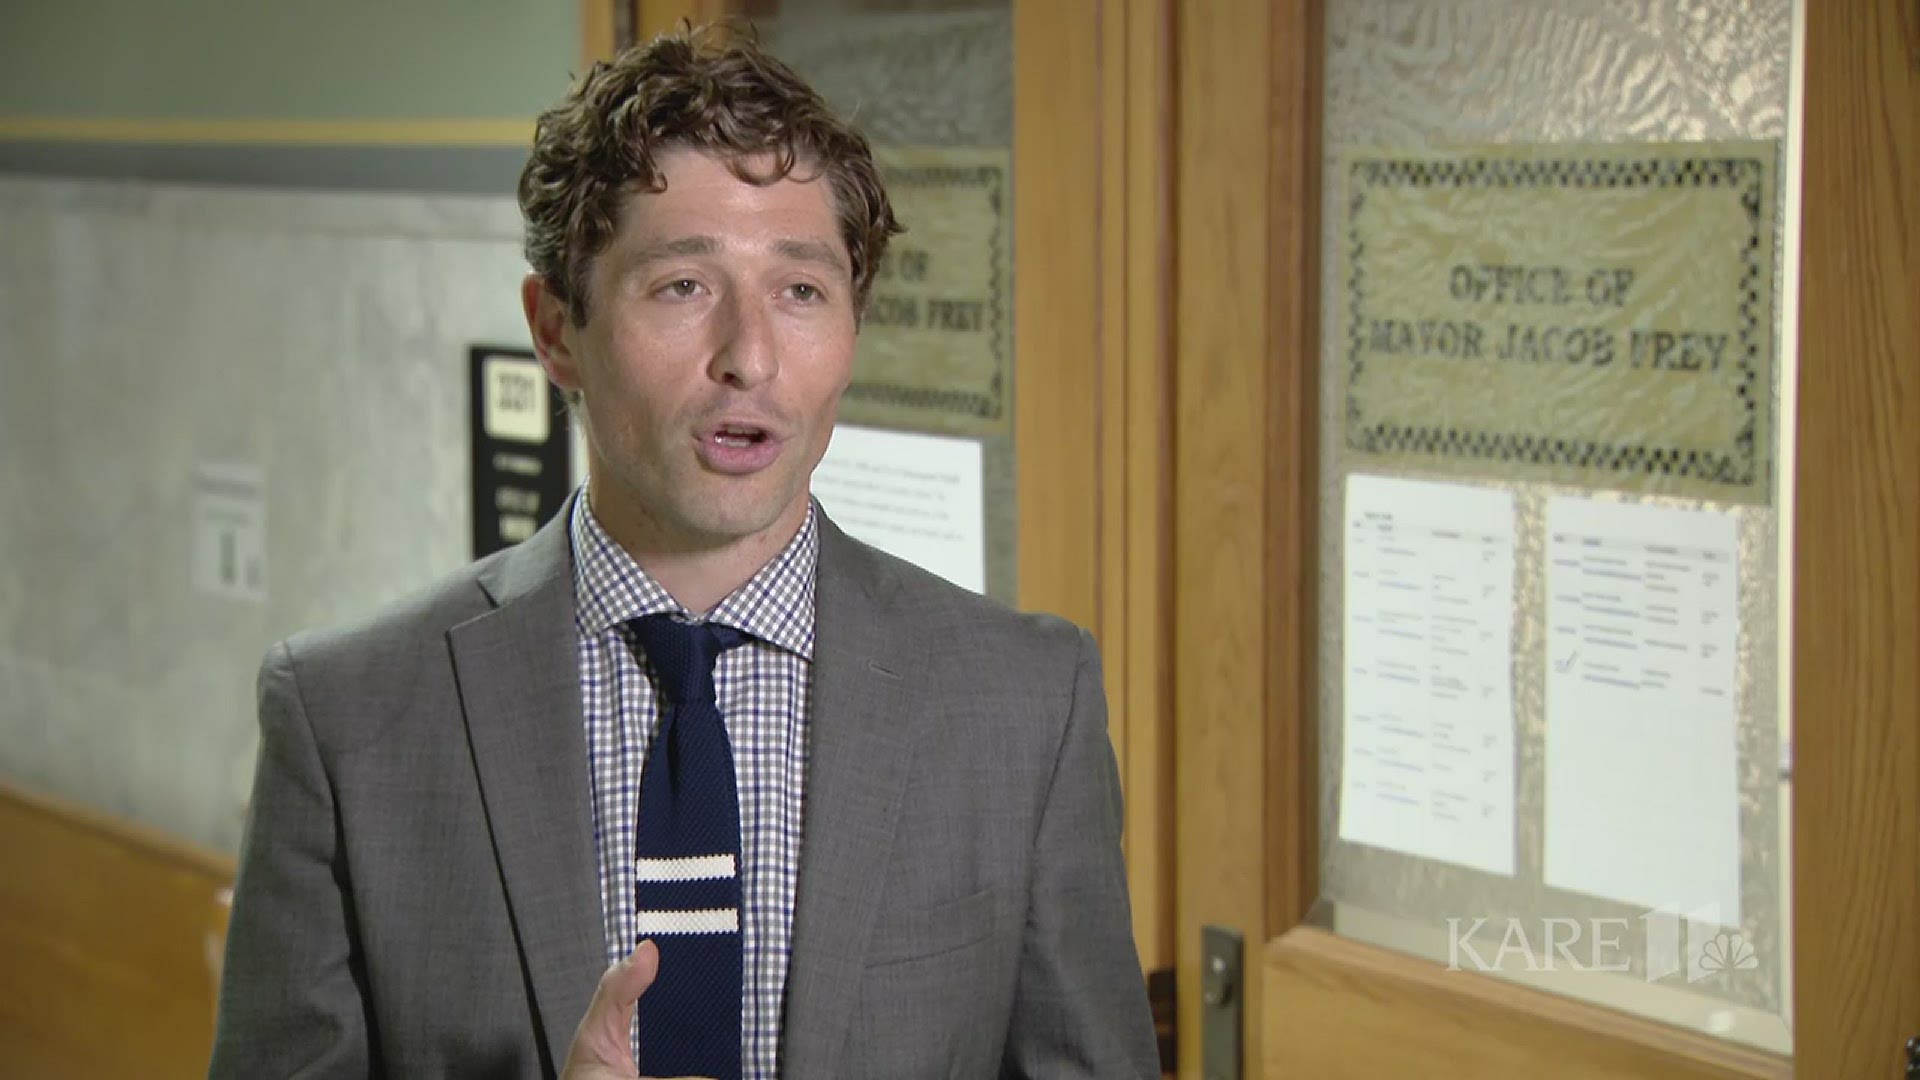 Minneapolis Mayor Jacob Frey comments on new MPD policies regarding the reporting of use of force and de-escalation.